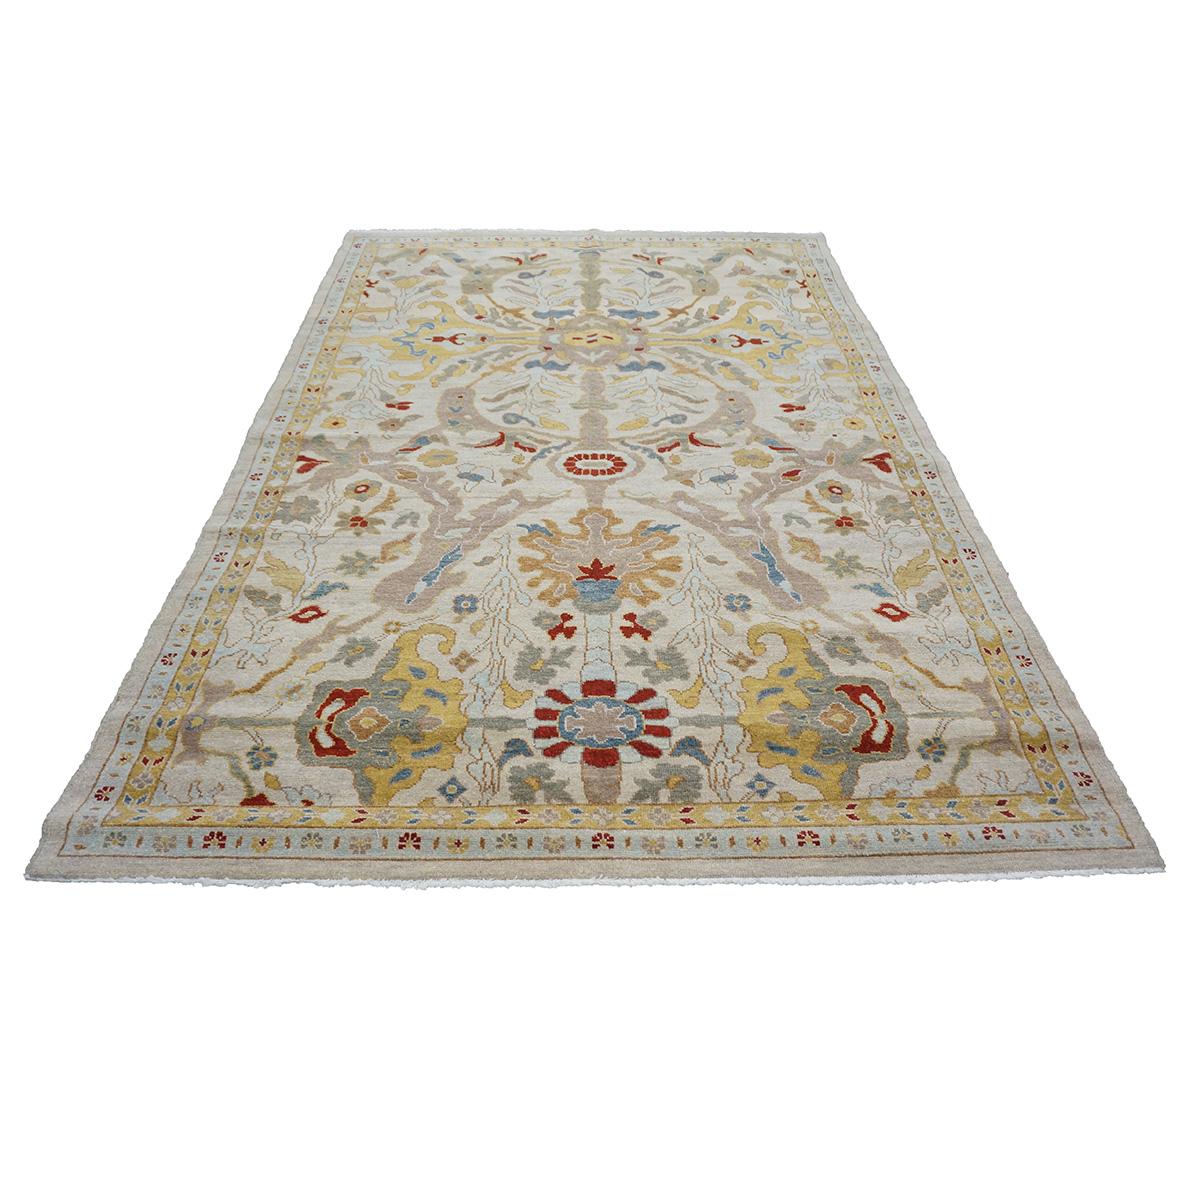 Ashly Fine Rugs presents an antique recreation of an original Persian Sultanabad Handmade Area Rug. Part of our own limited production, this antique recreation was thought of and created in-house and 100% handmade in Afghanistan by master weavers.